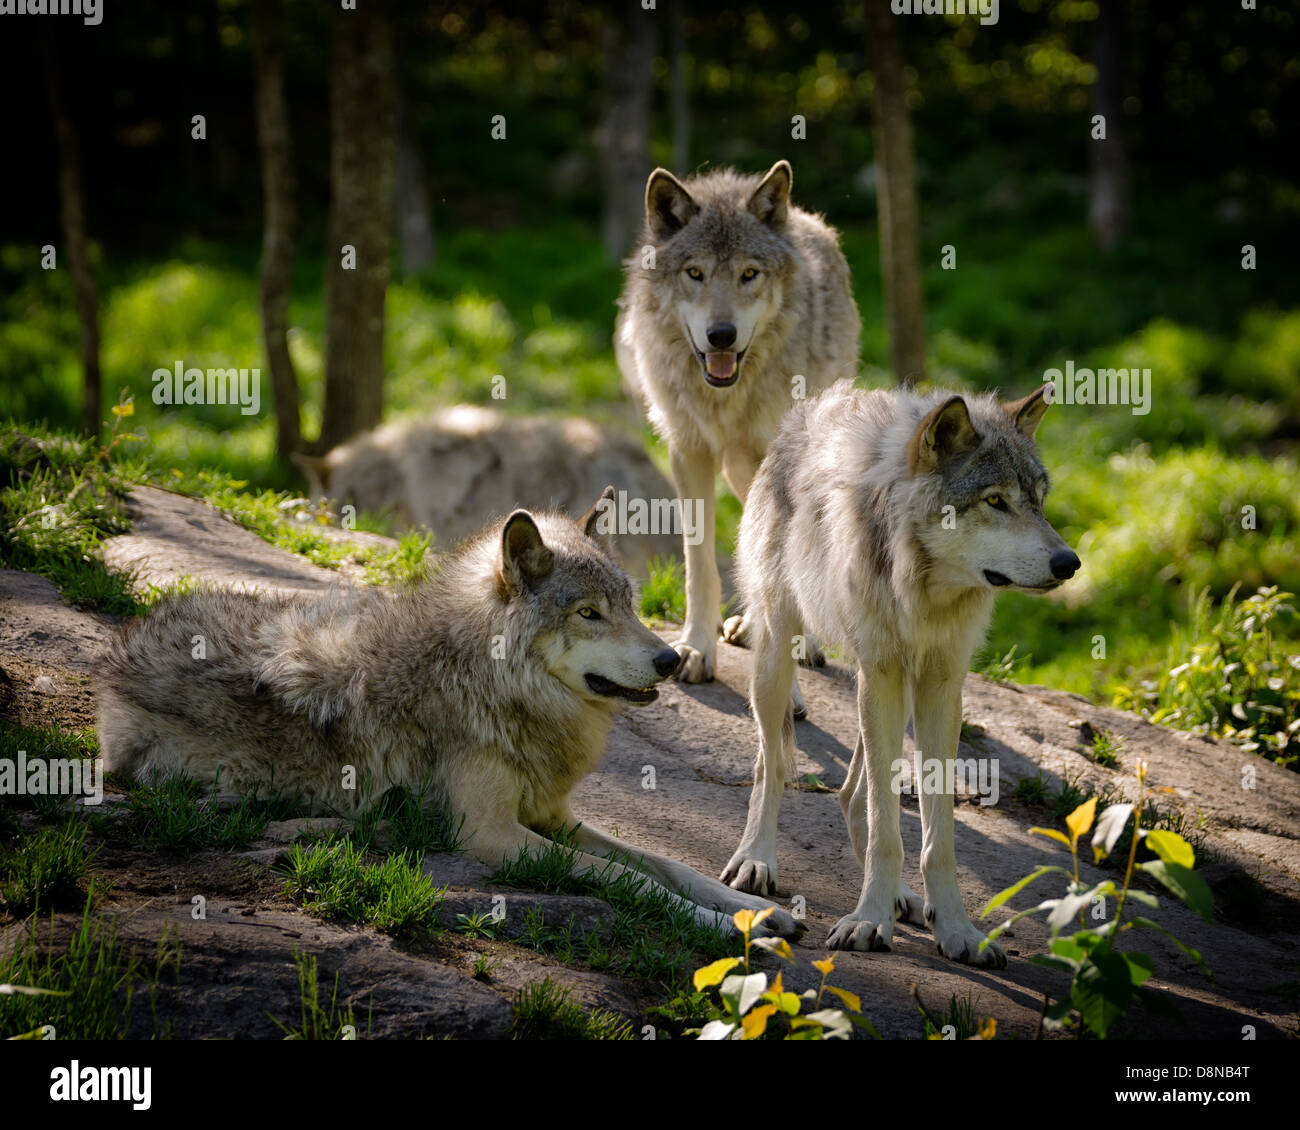 A small pack of three Eastern timber wolves gather on a rocky slope in the North American wilderness. Stock Photo